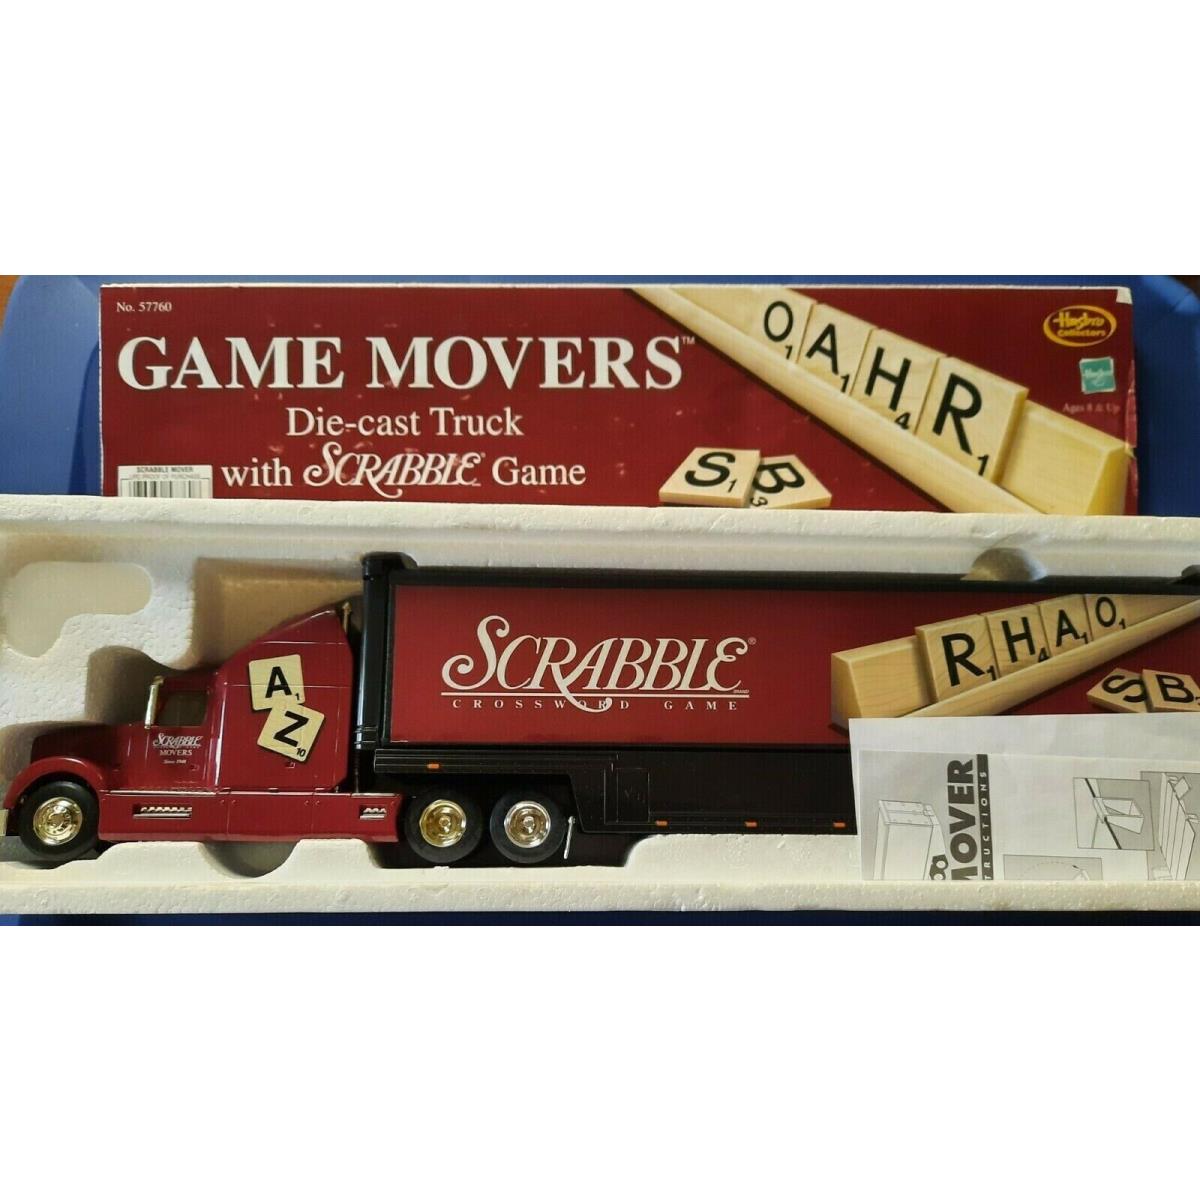 Hasbro Collectors Game Movers Die-cast Truck with Scrabble Game 57760